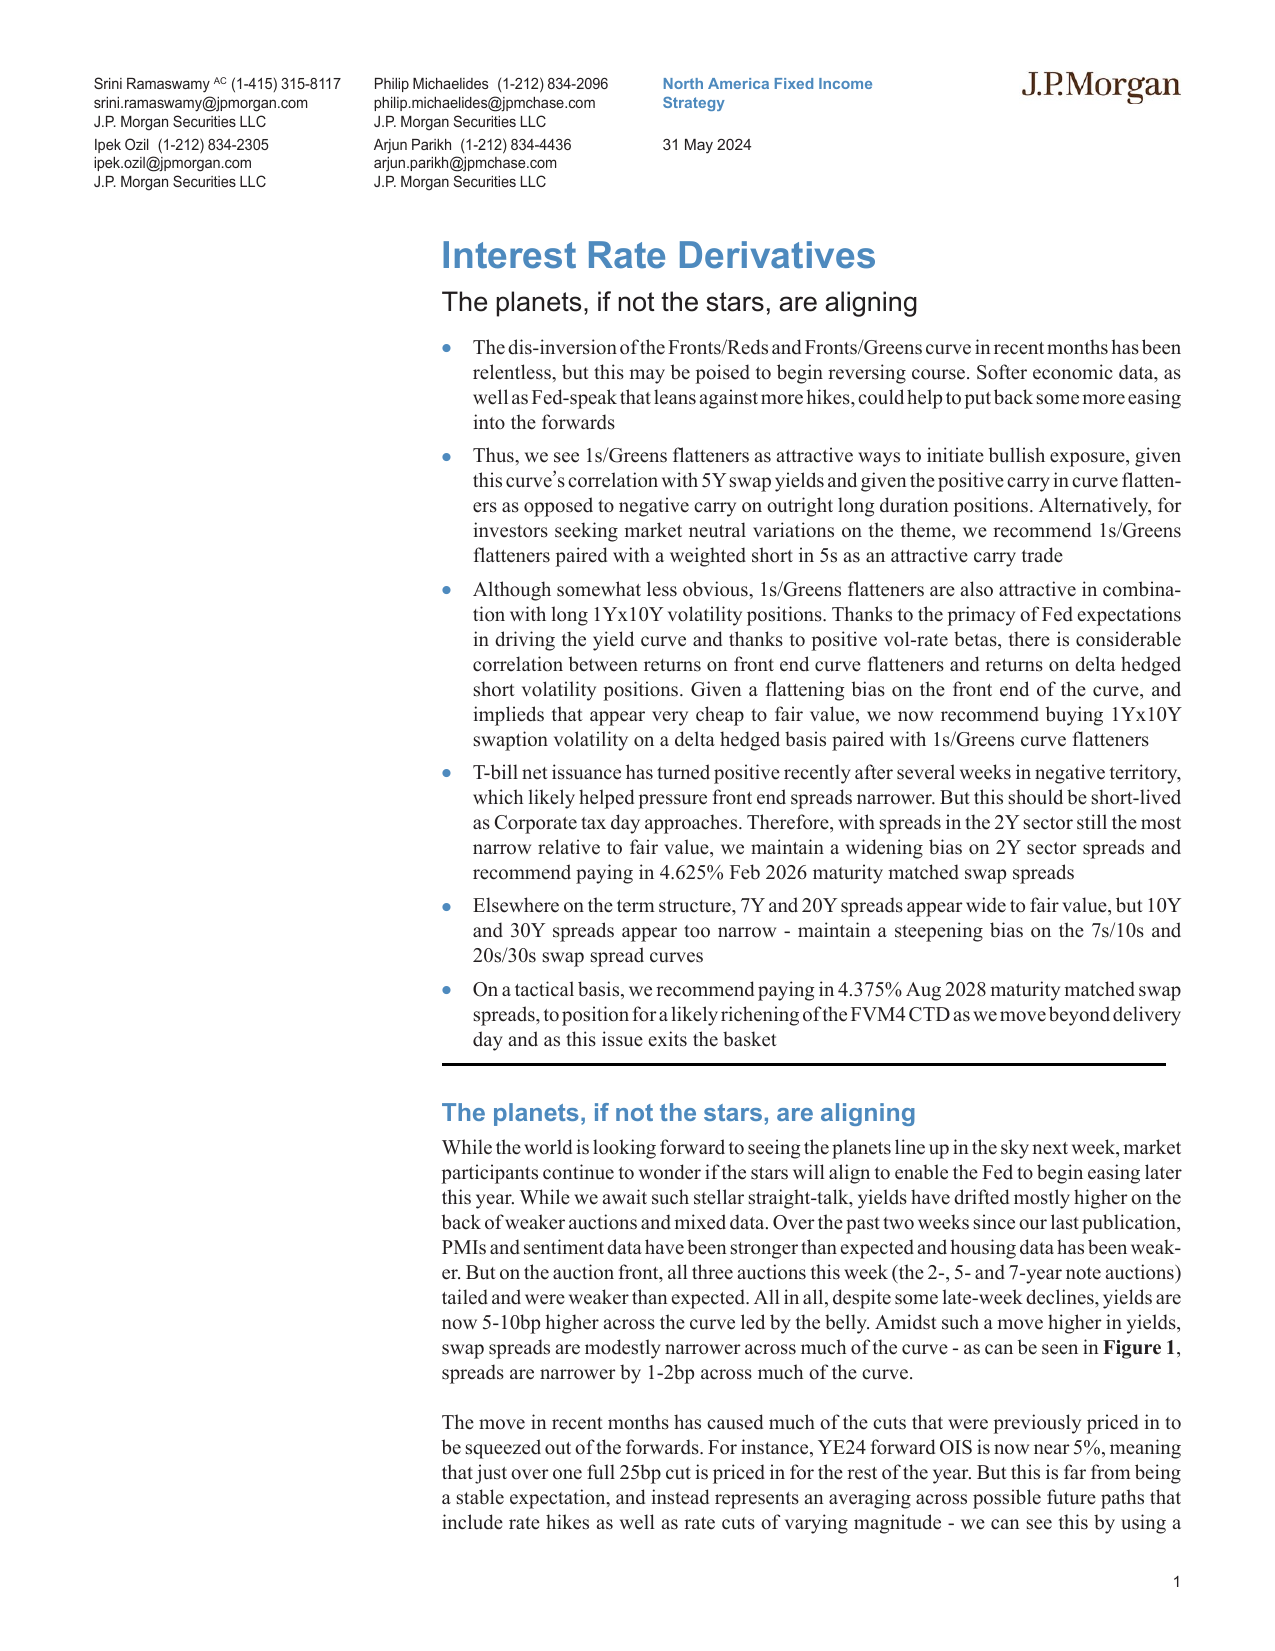 JPMorgan Econ  FI-Interest Rate Derivatives The planets, if not the stars, are...-108474419.pdf